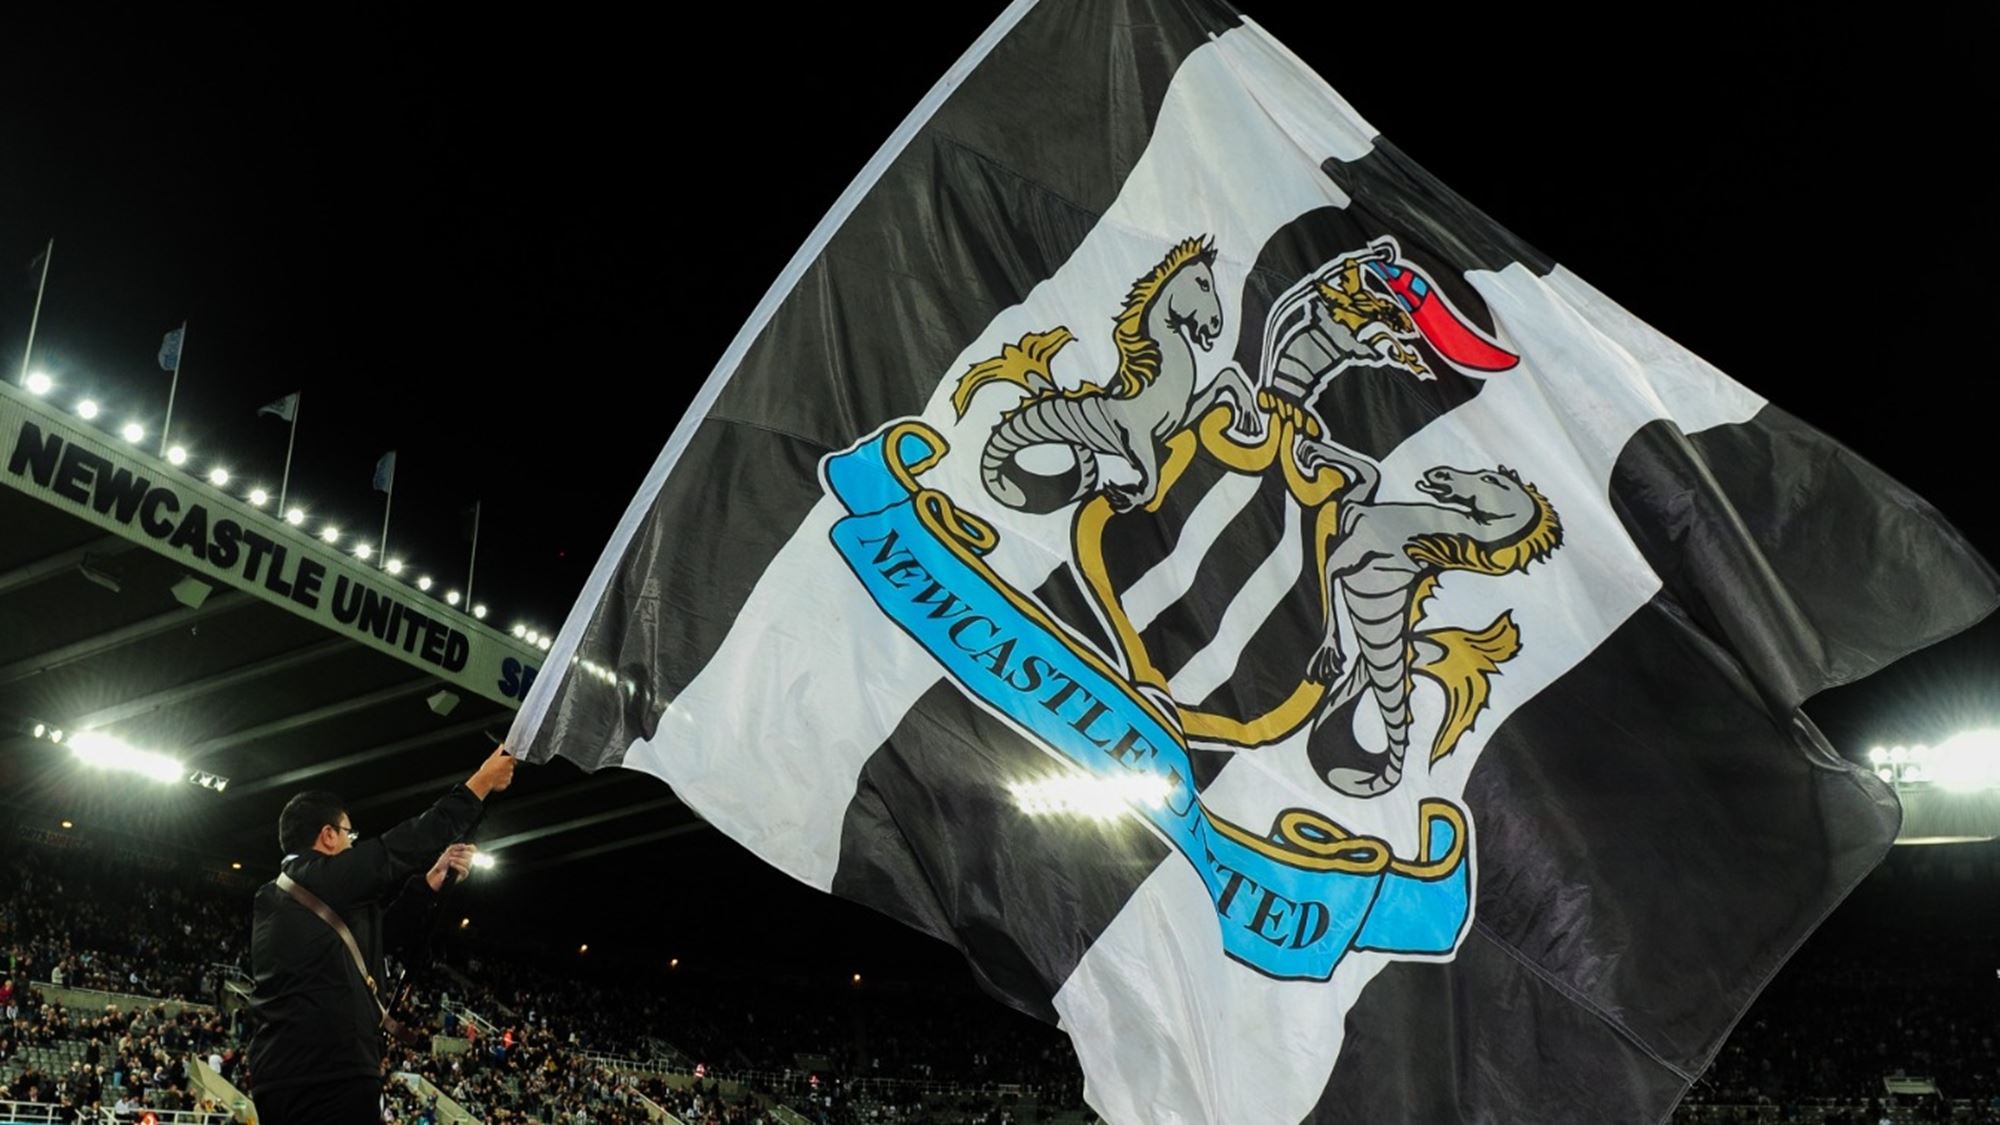 Saudi-led consortium completes takeover of Newcastle United